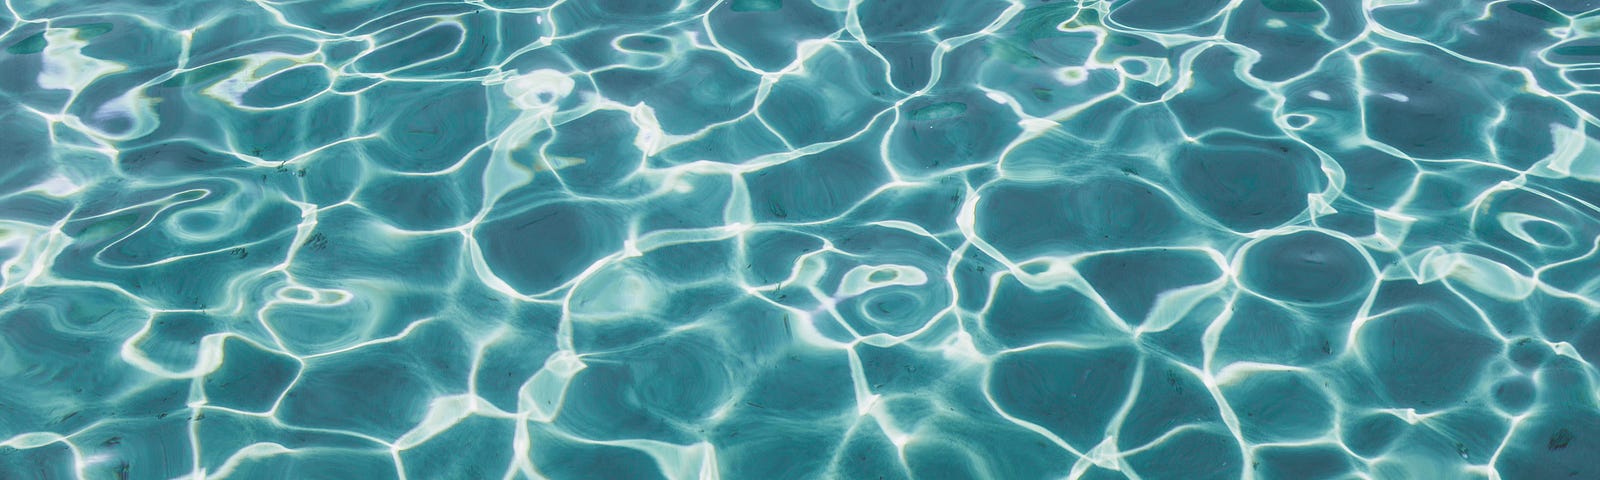 Image of ripples in the sea